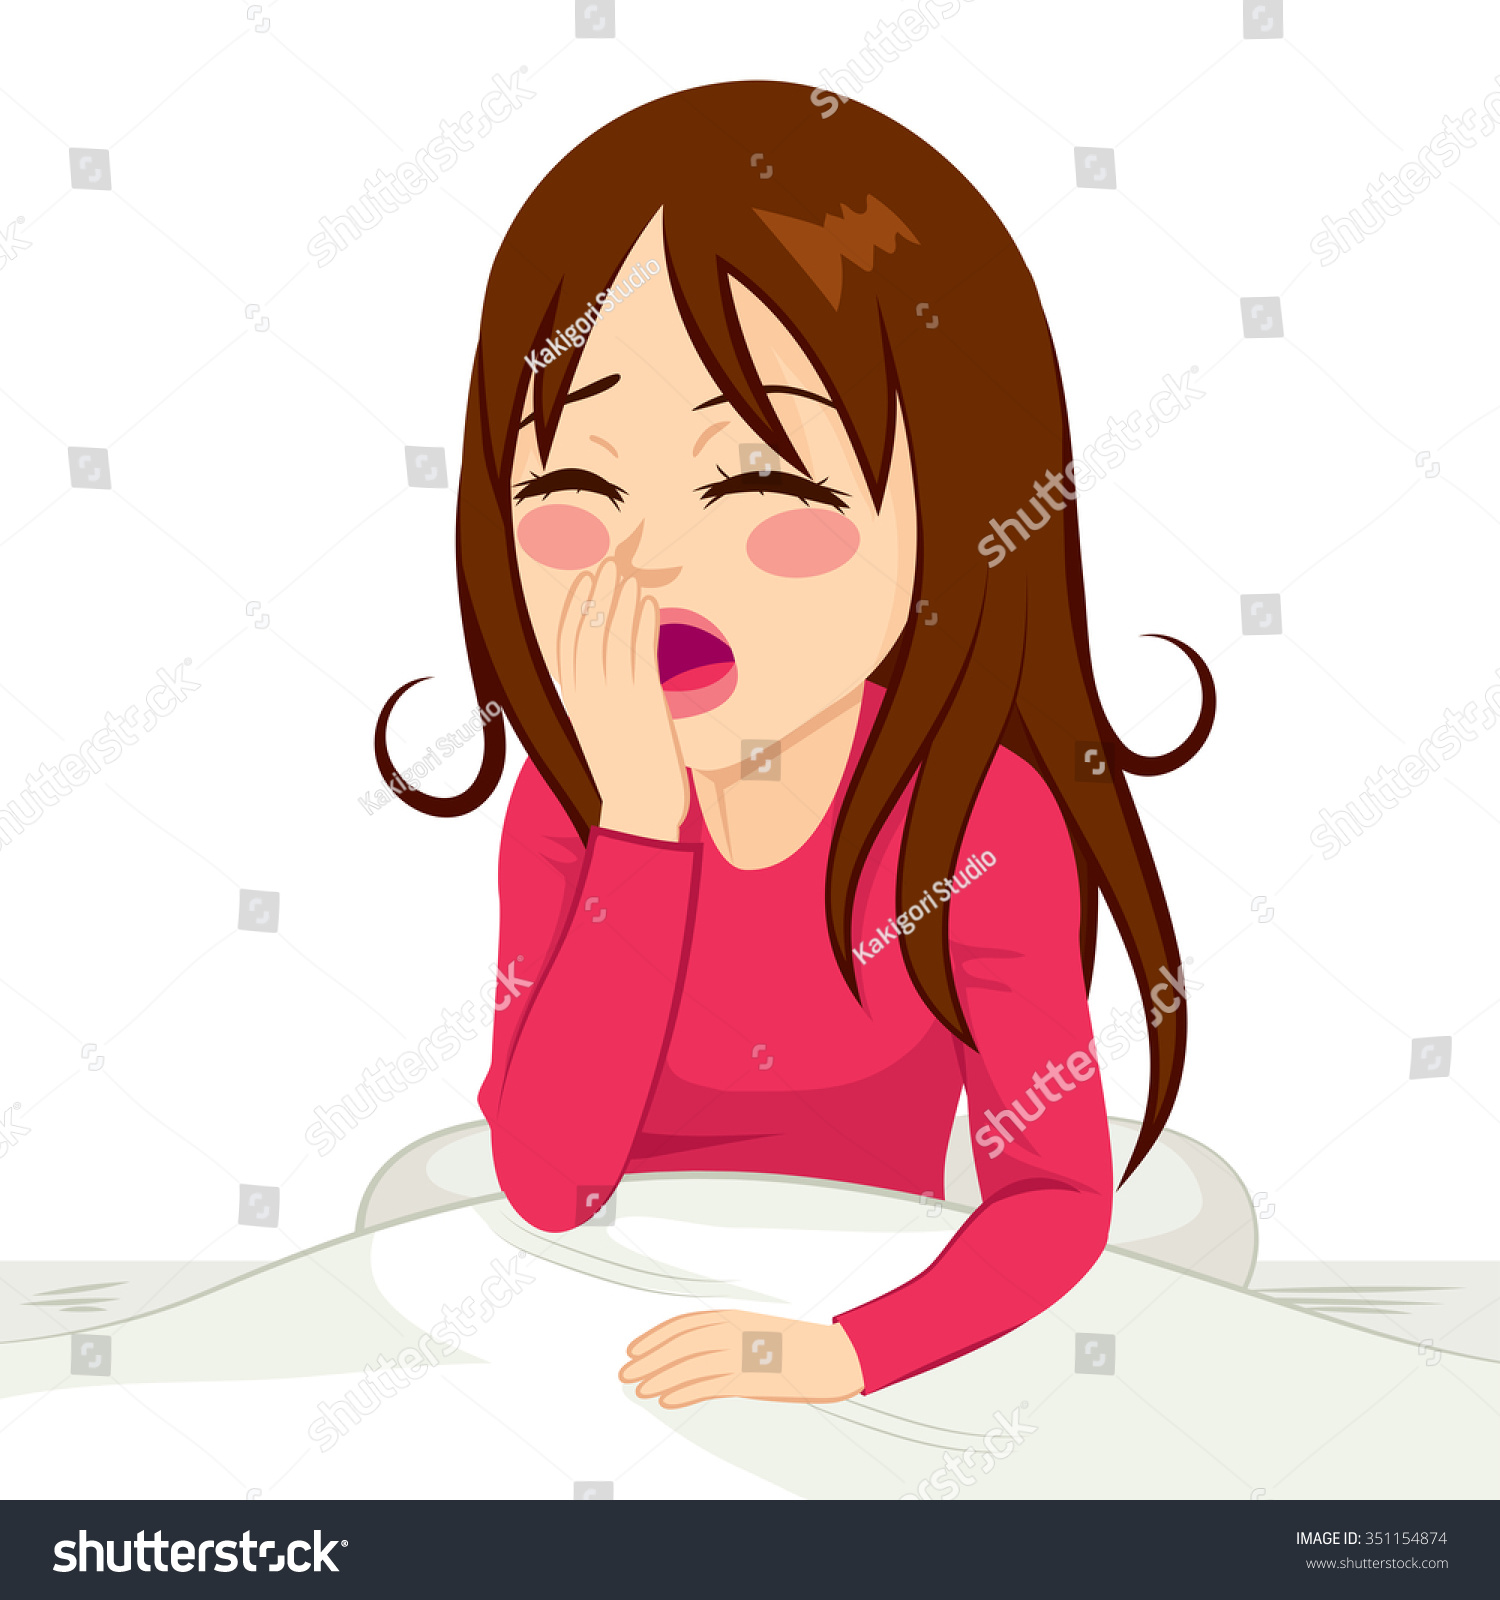 clipart of girl waking up - photo #25